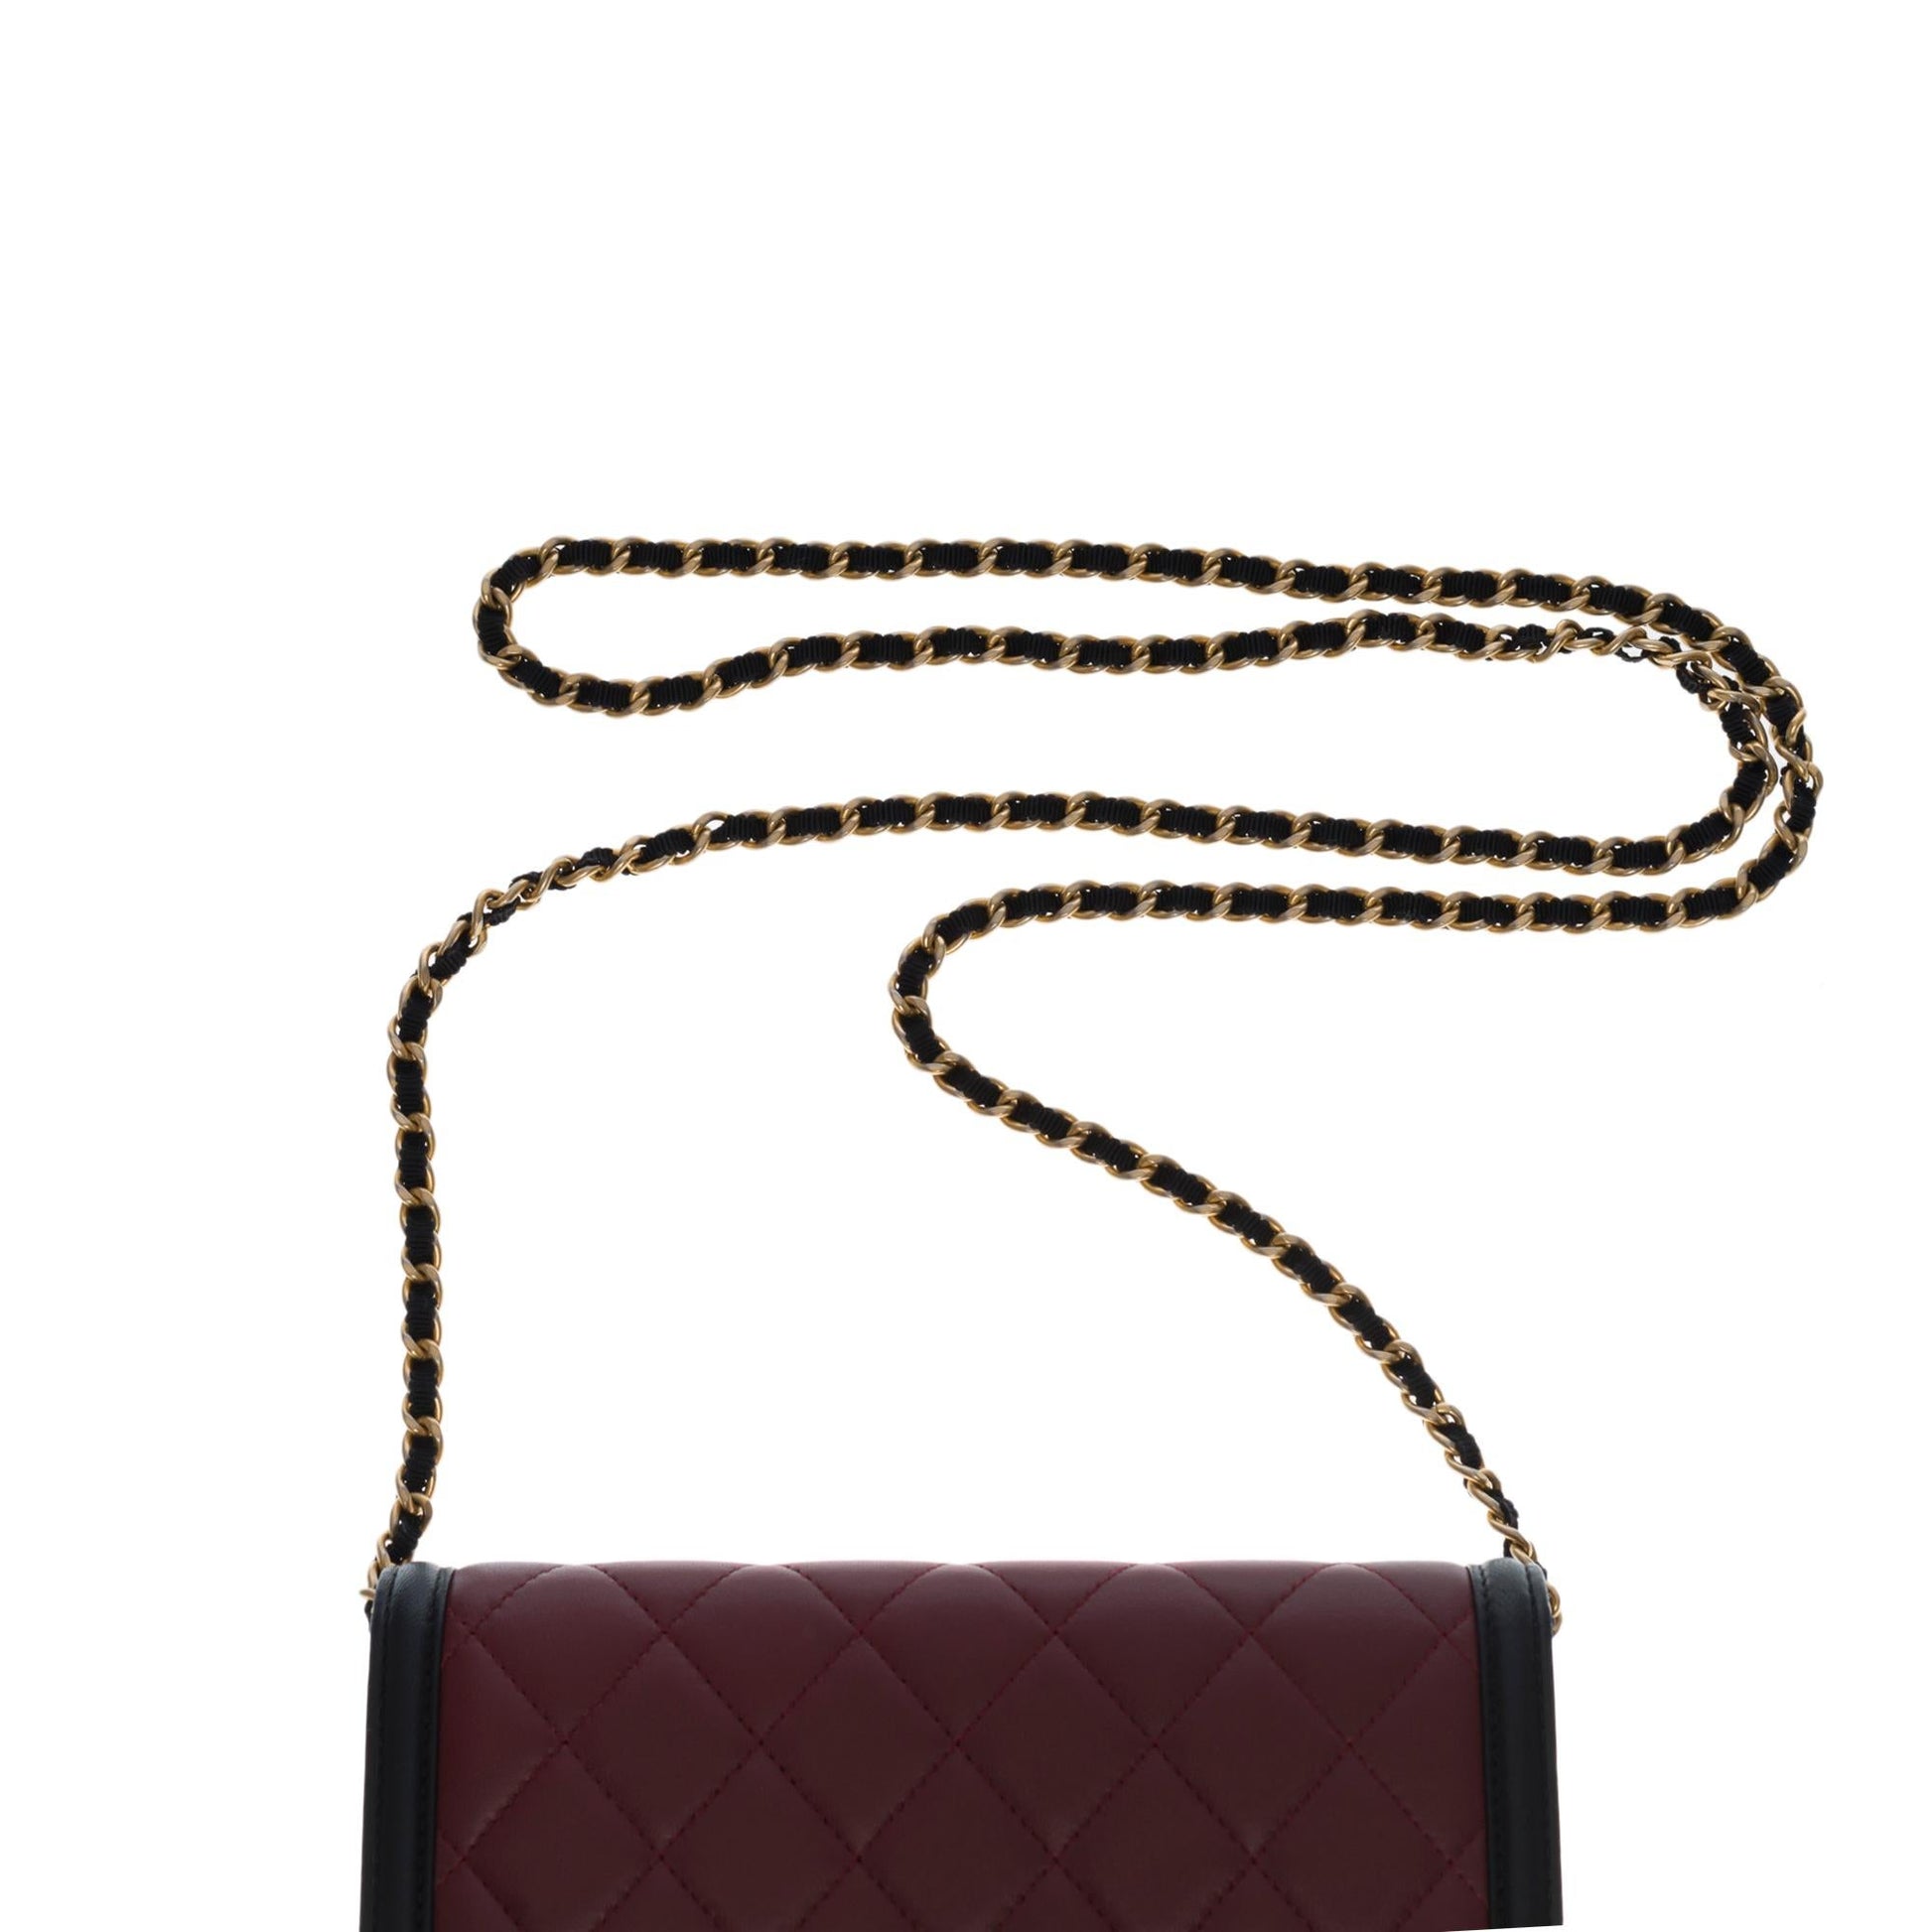 CHANEL Wallet on Chain shoulder bag in burgundy/black quilted leather